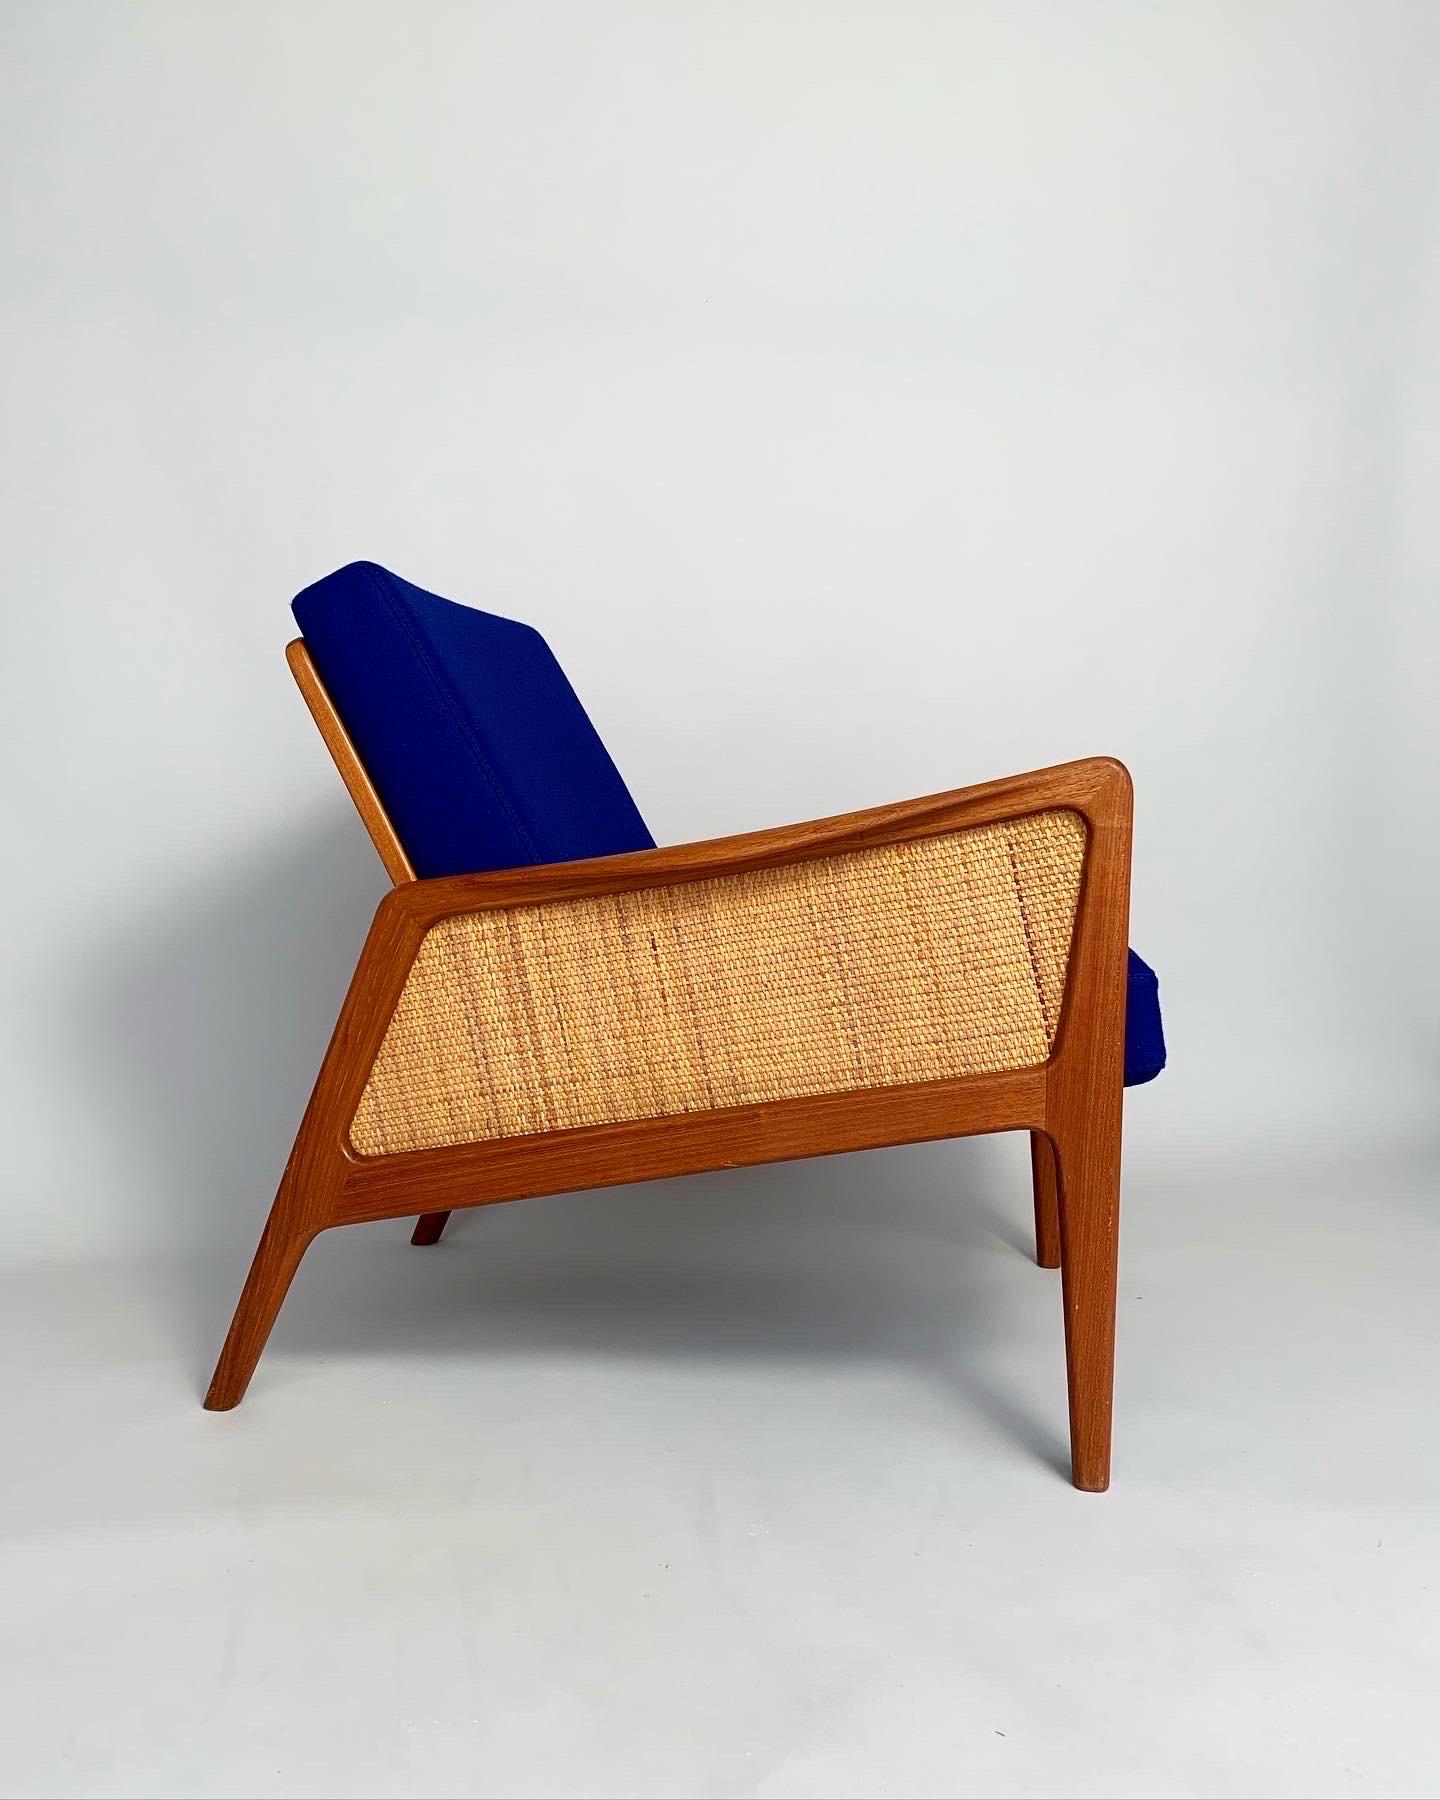 Rare lounge chair by Peter Hvidt & Orla Mølgaard-Nielsen, model FD 151 for France & Daverkosen in the 1950s.

Hand-crafted teak frame with woven cane sides and back, new cold foam cushions covered in dark blue Kvadrat, Divina, No 791. Soft touch and